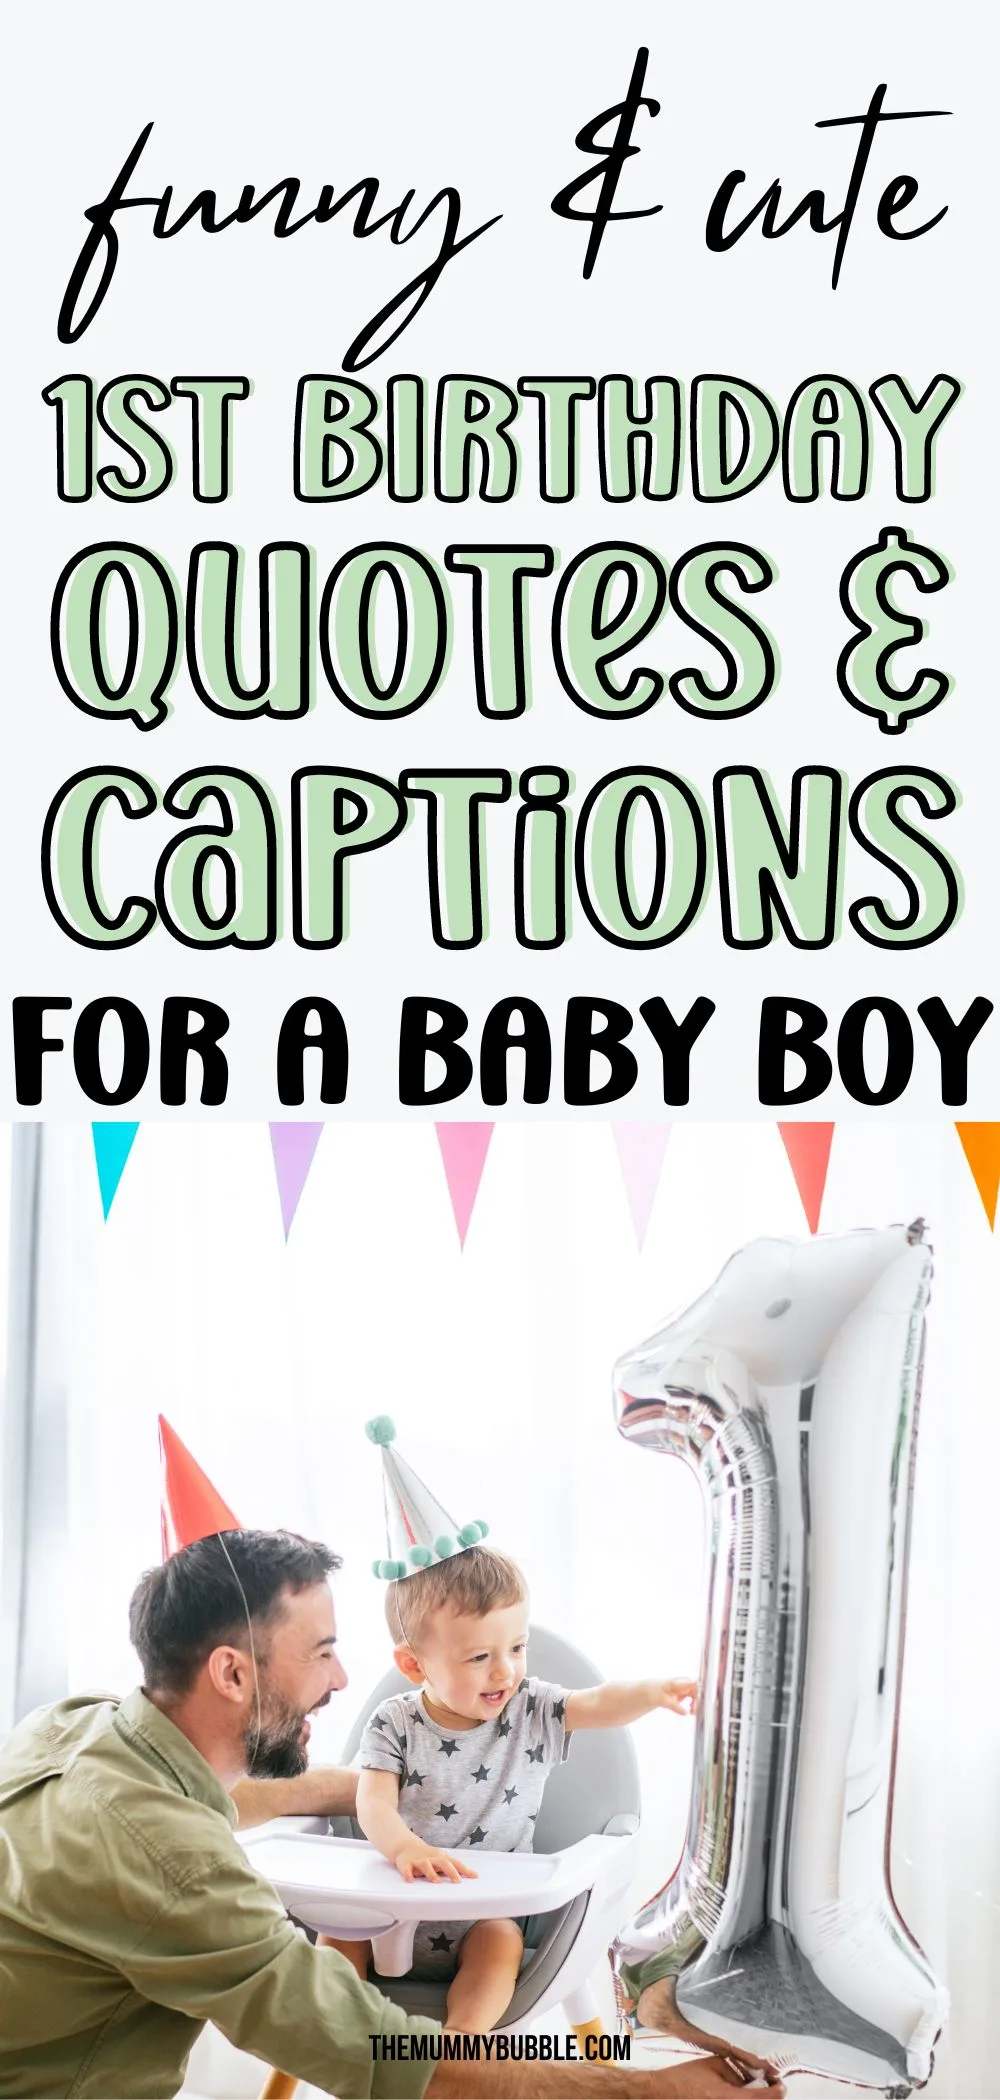 First birthday quotes and captions for a baby boy 